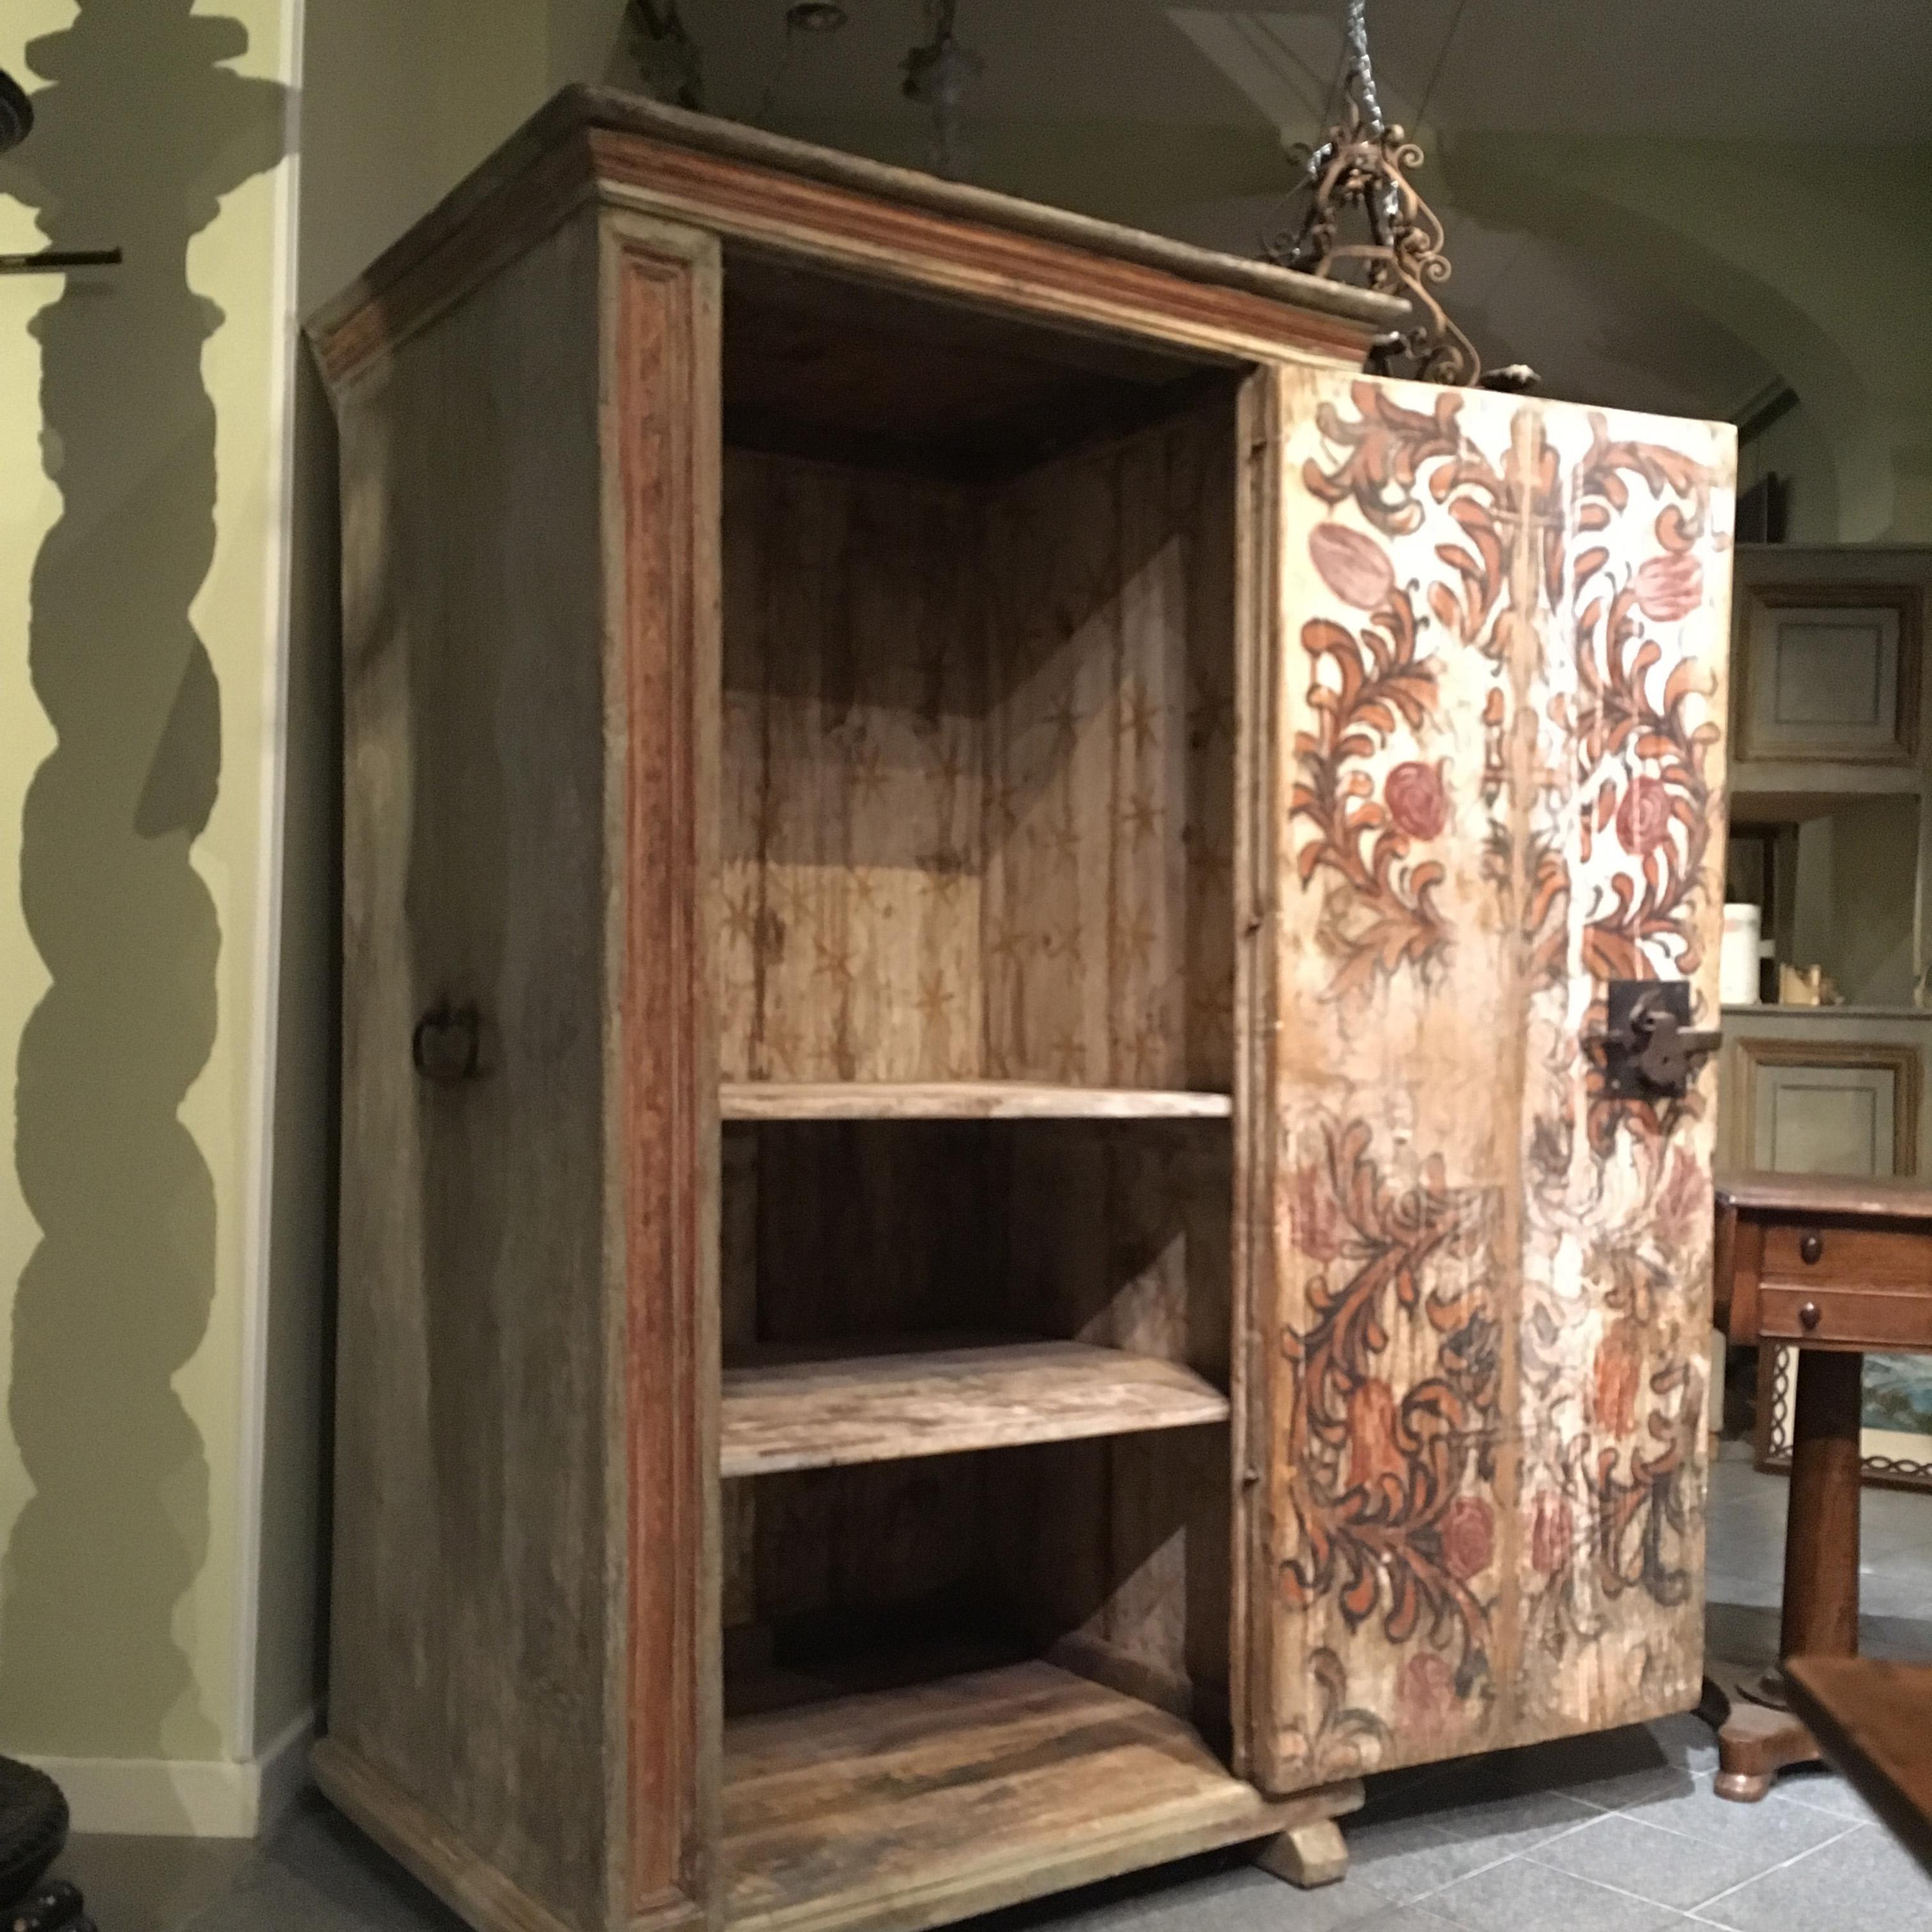 16th Century Italian Painted Cabinet Used as Storage for a Madonna Sculpture For Sale 2